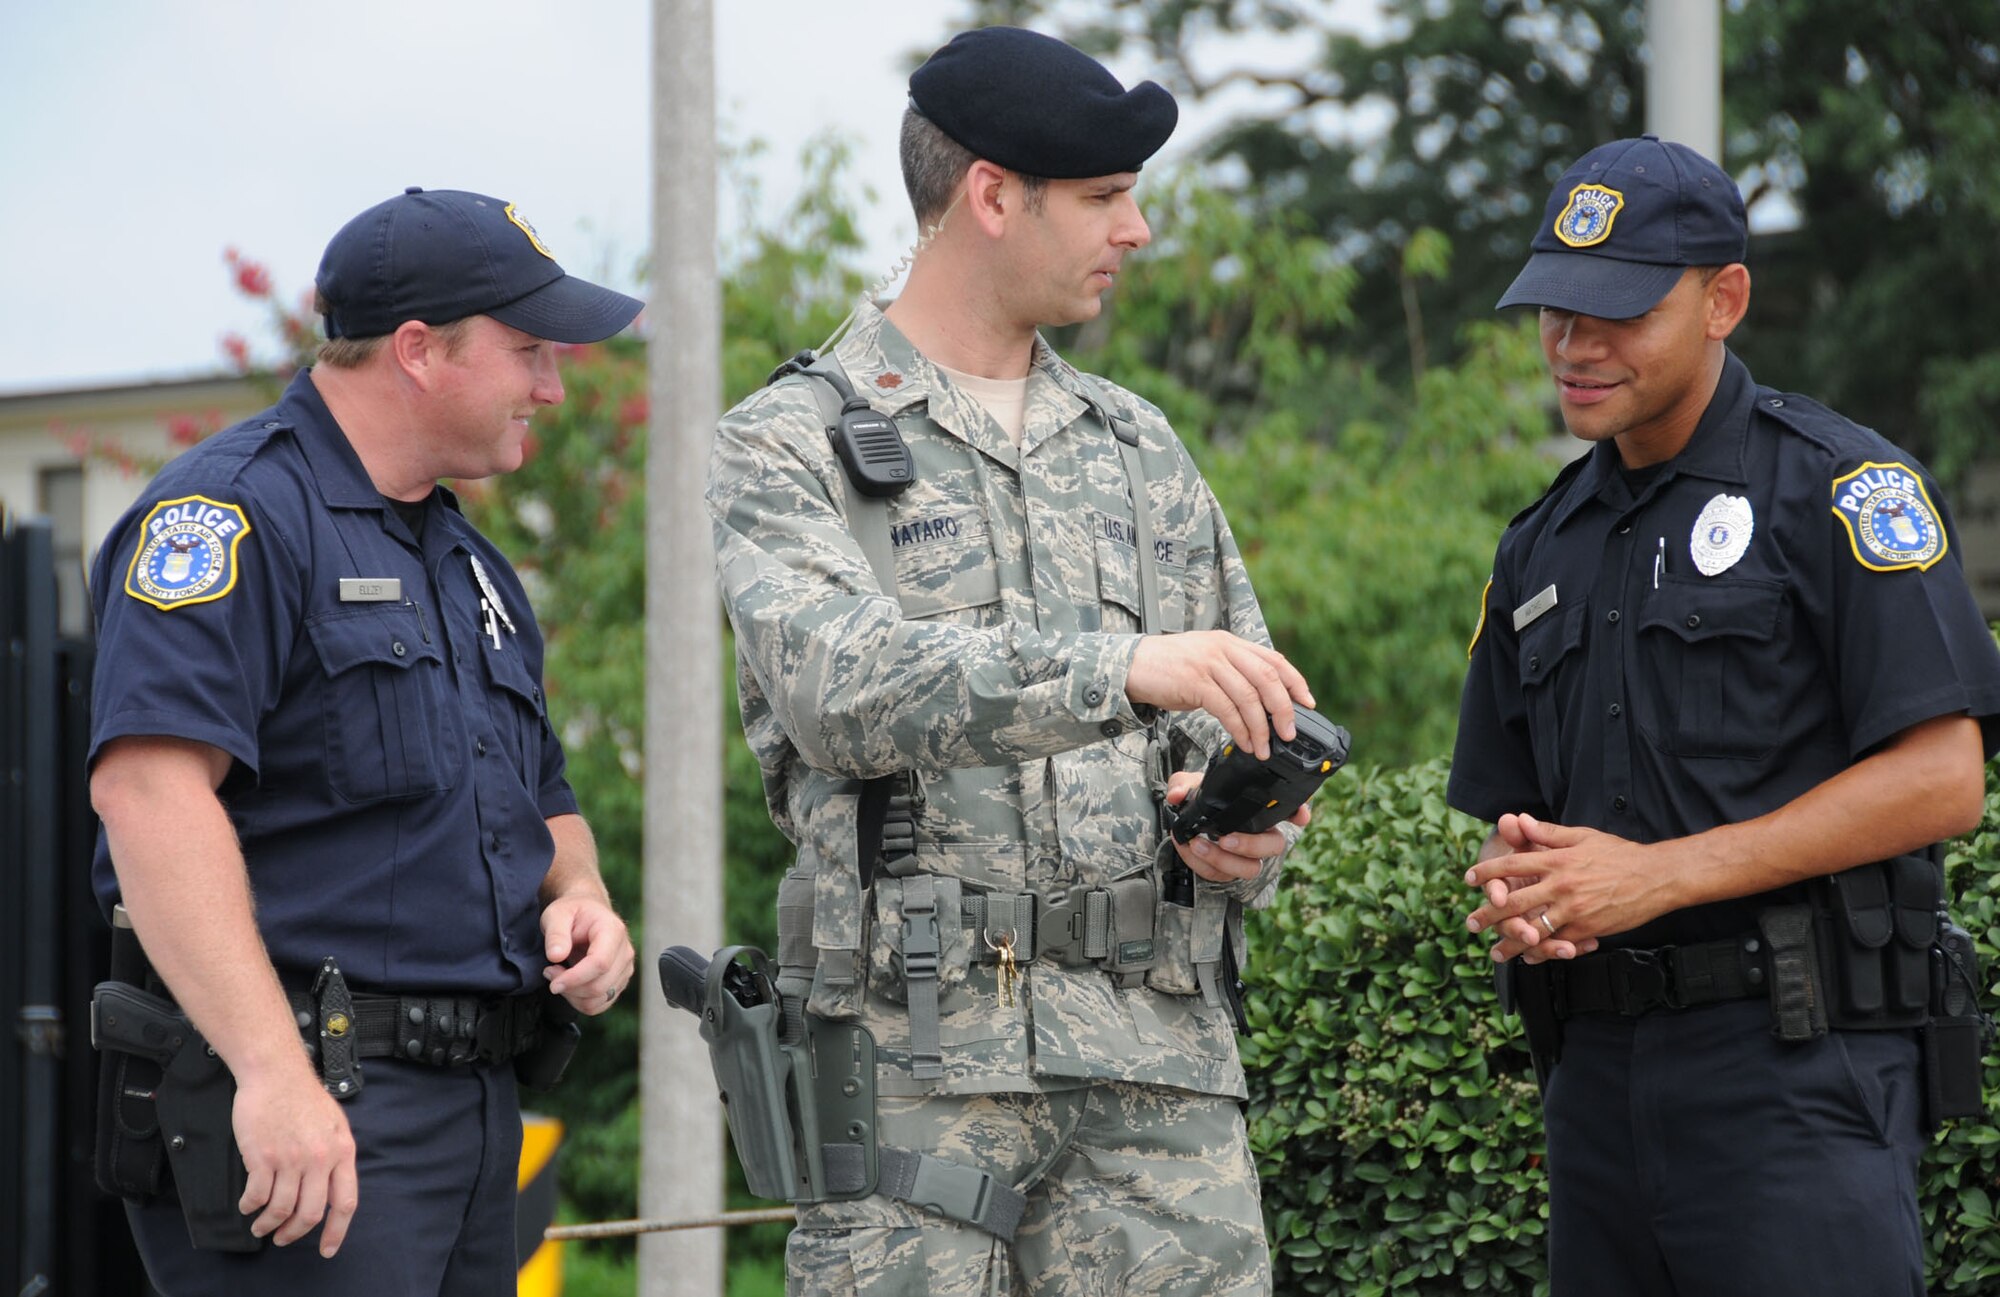 From left, Jeremy Ellway, 81st Security Forces Squadron, Maj. Matthew Pignataro, new 81st SFS commander, and Maurice Mathis, 81st SFS, discuss the associated challenges and benefits of Defense Biometric Identification System implementation at the White Avenue Gate. Pignataro took command July 16. The new commander
comes to Keesler from the Air Force Personnel Center, Randolph Air Force Base, Texas, where he was the chief of security forces air and space expeditionary force scheduling.  Maj. James Clark, previous commander, is pursuing a master’s degree in homeland defense at the Naval Post-graduate School, Monterey Bay, Calif.  (U.S. Air Force photo by Kemberly Groue)